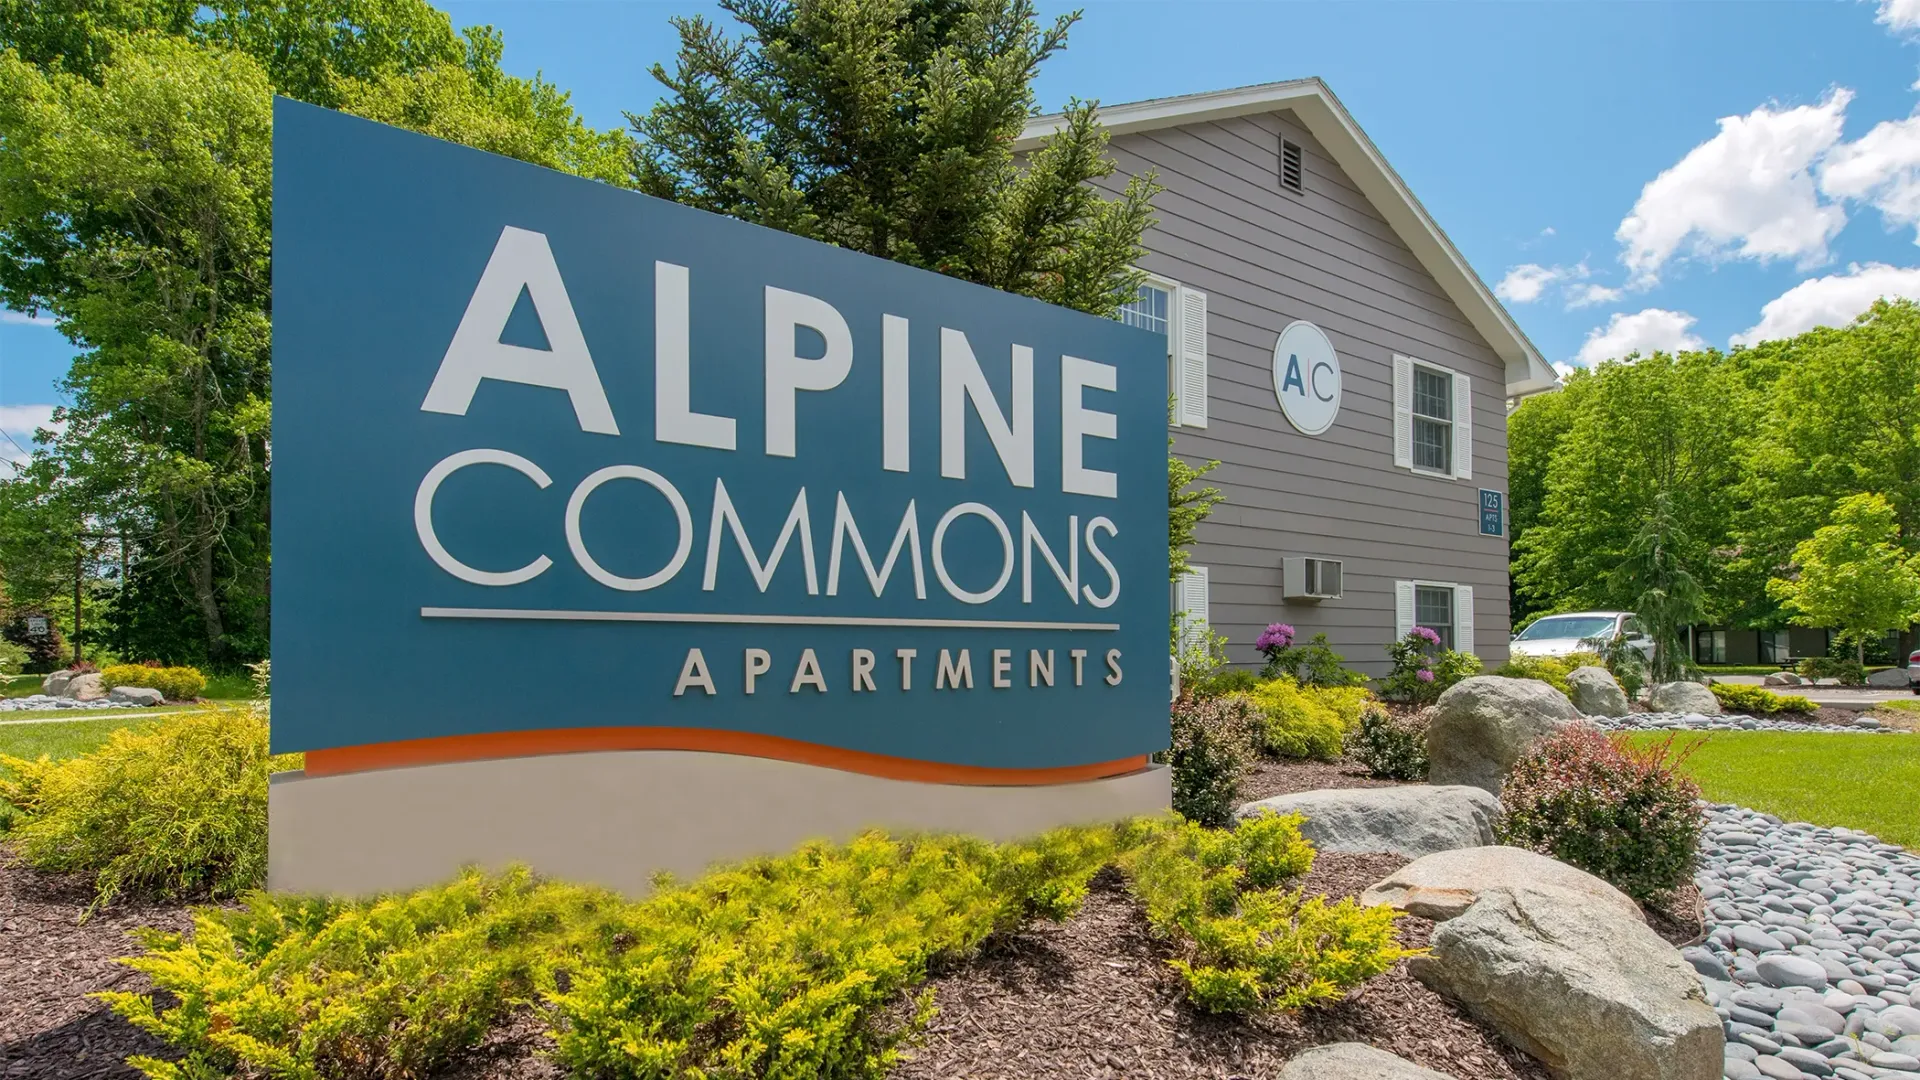 The front sign of the community, reading 'Alpine Commons' surrounded by lush green landscaping